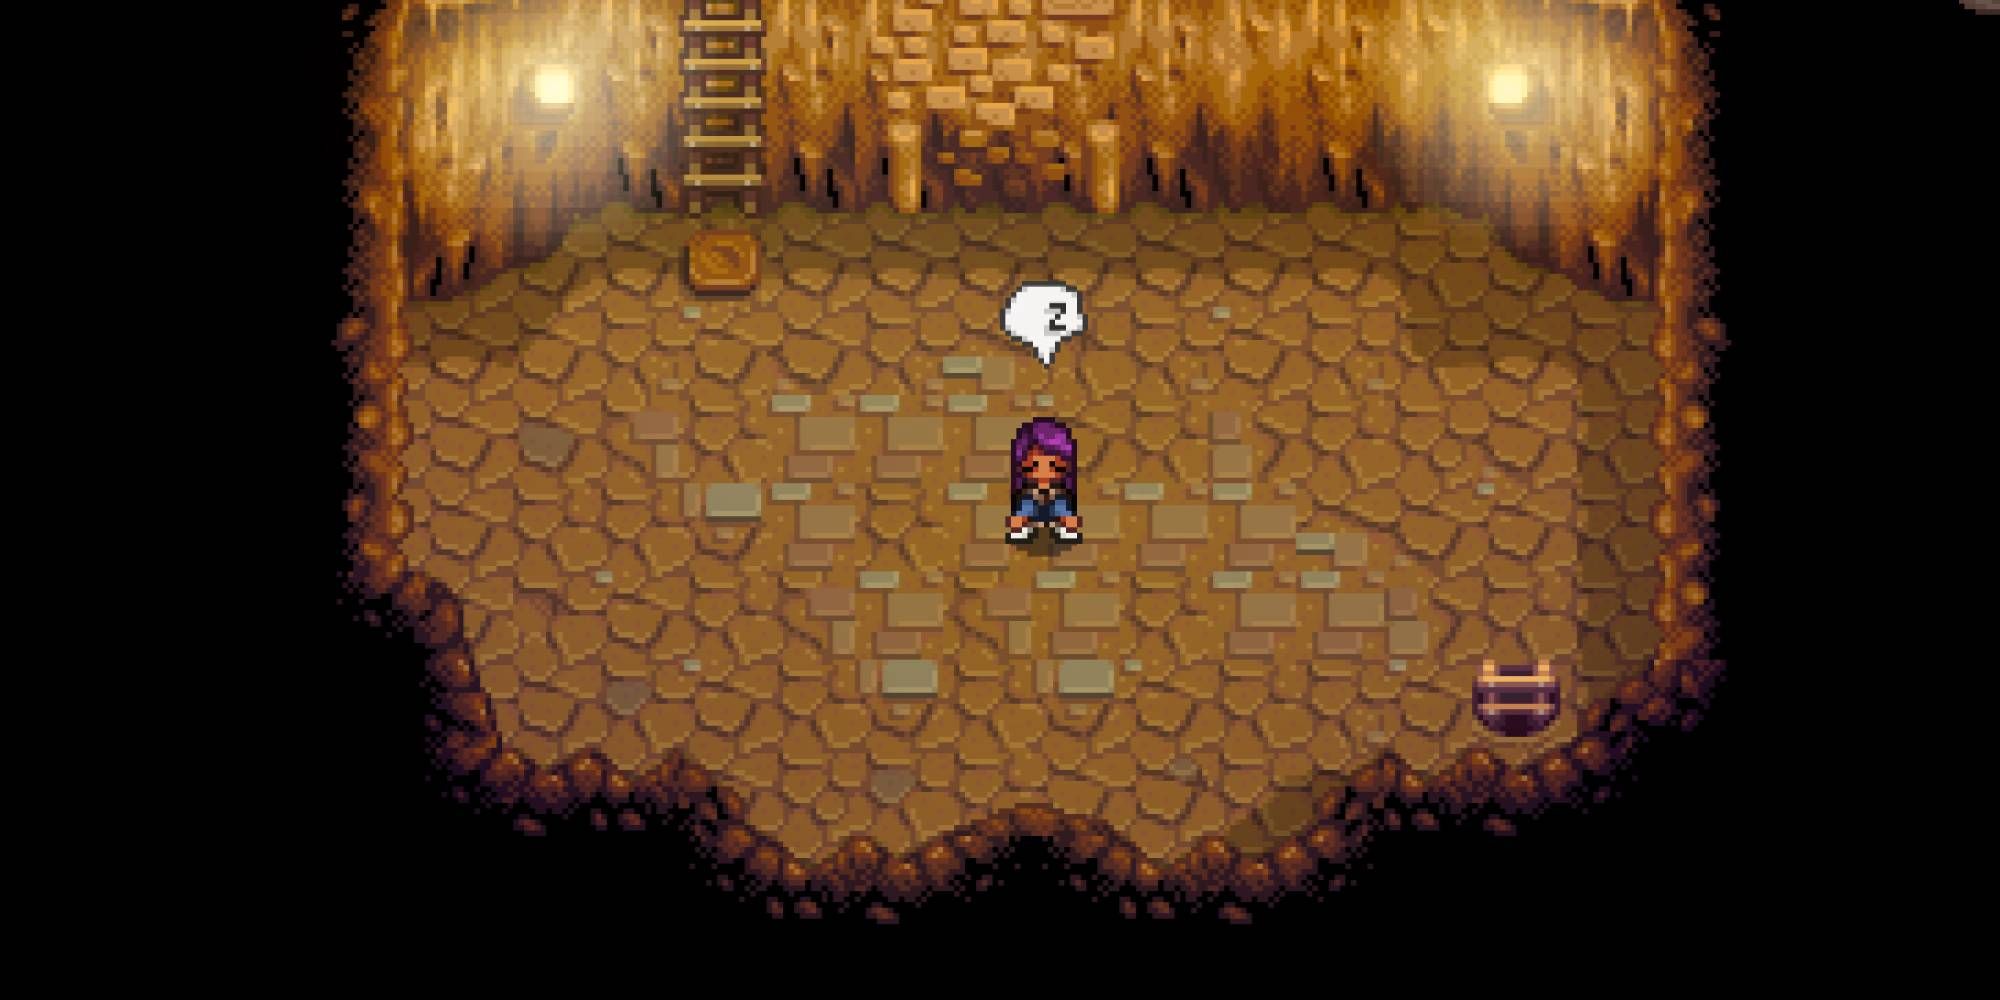 A farmer passing Out In The Skull Cavern